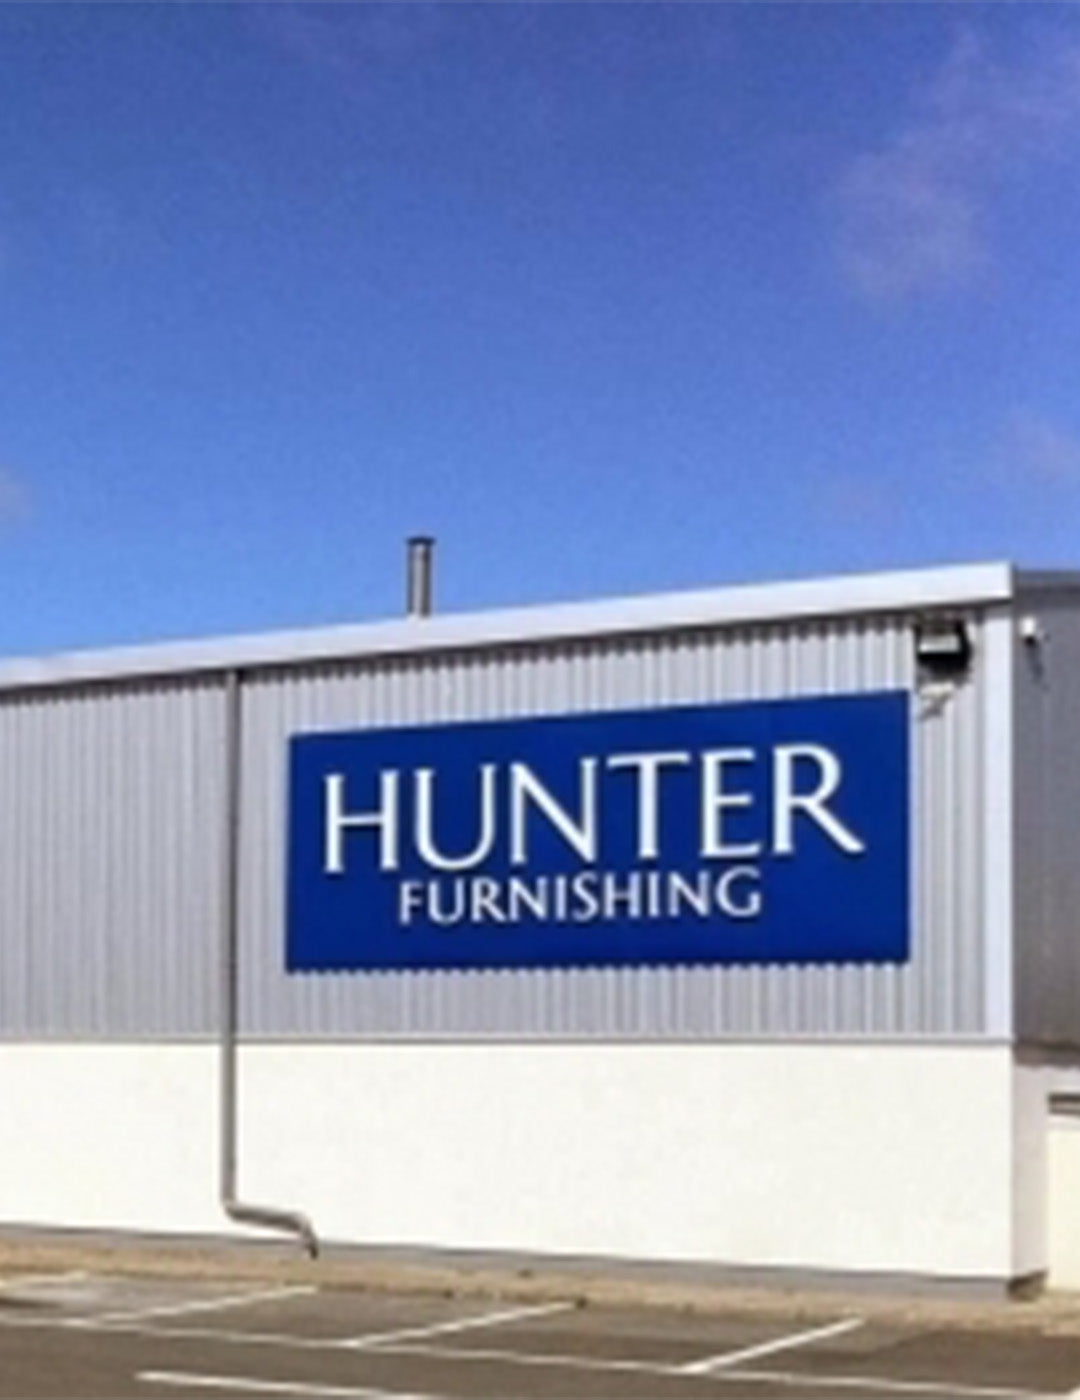 Hunter Furnishing: A Family-Owned Business Excelling in Customer Service